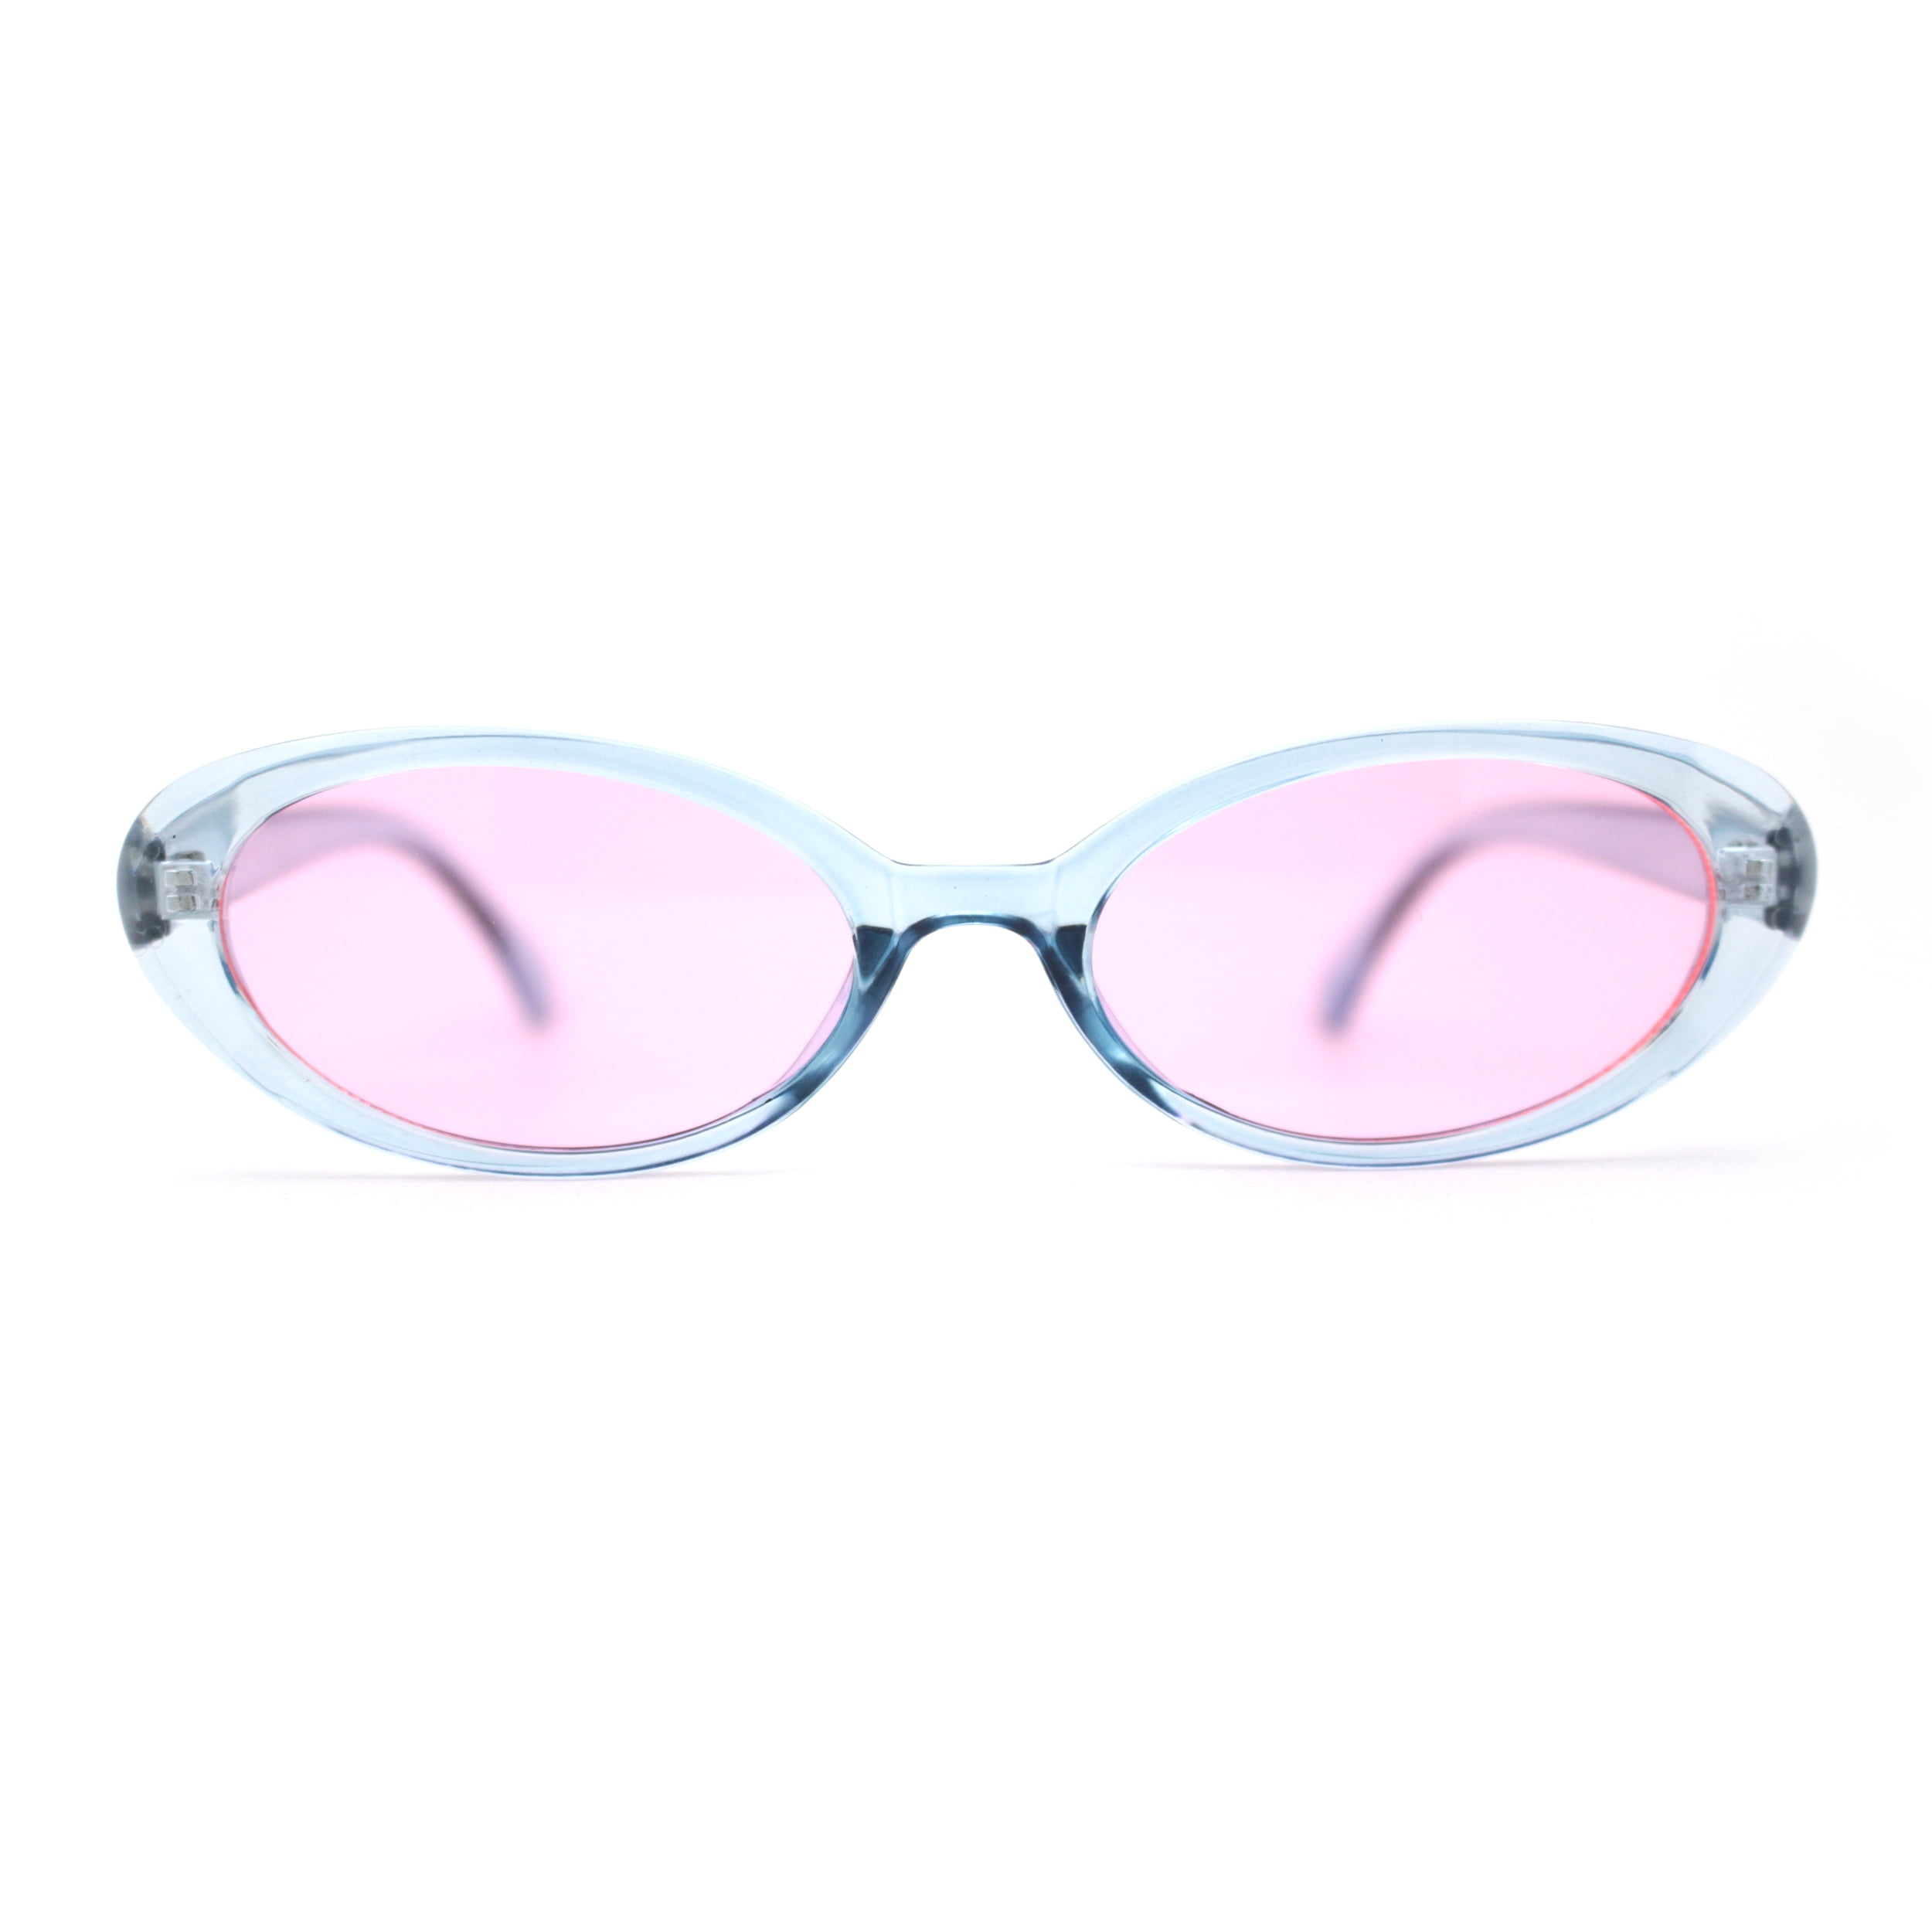 SA106 Womens Simple Classical Oval Thin Plastic Sunglasses Blue Pink